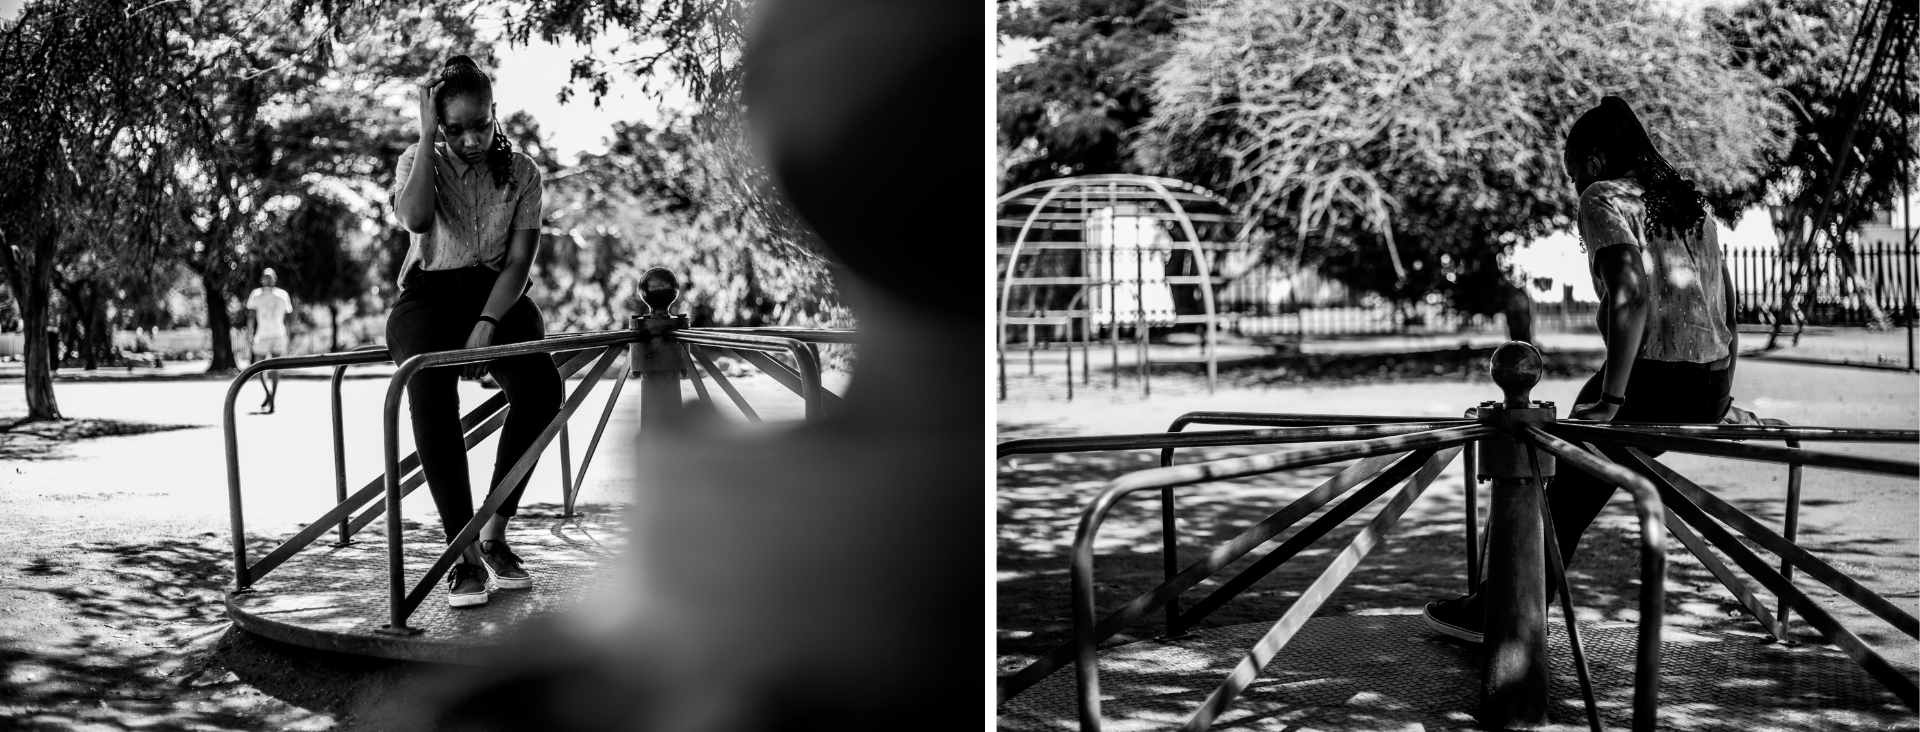 Young woman sits alone in a playground on a carousel, staring at the ground